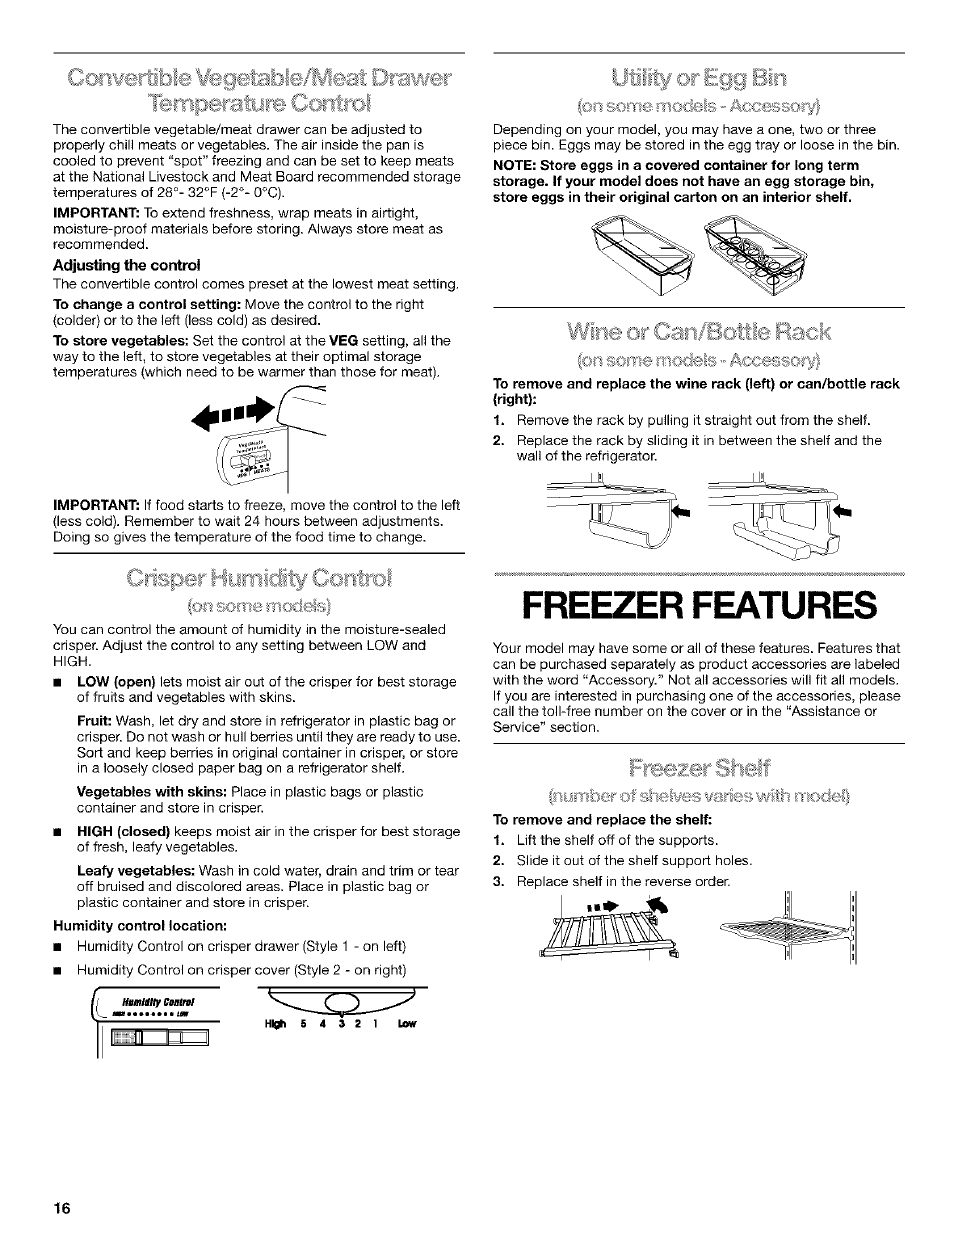 Adjusting the control, Wirie or car: l.lr, Freezer features | Kenmore ...